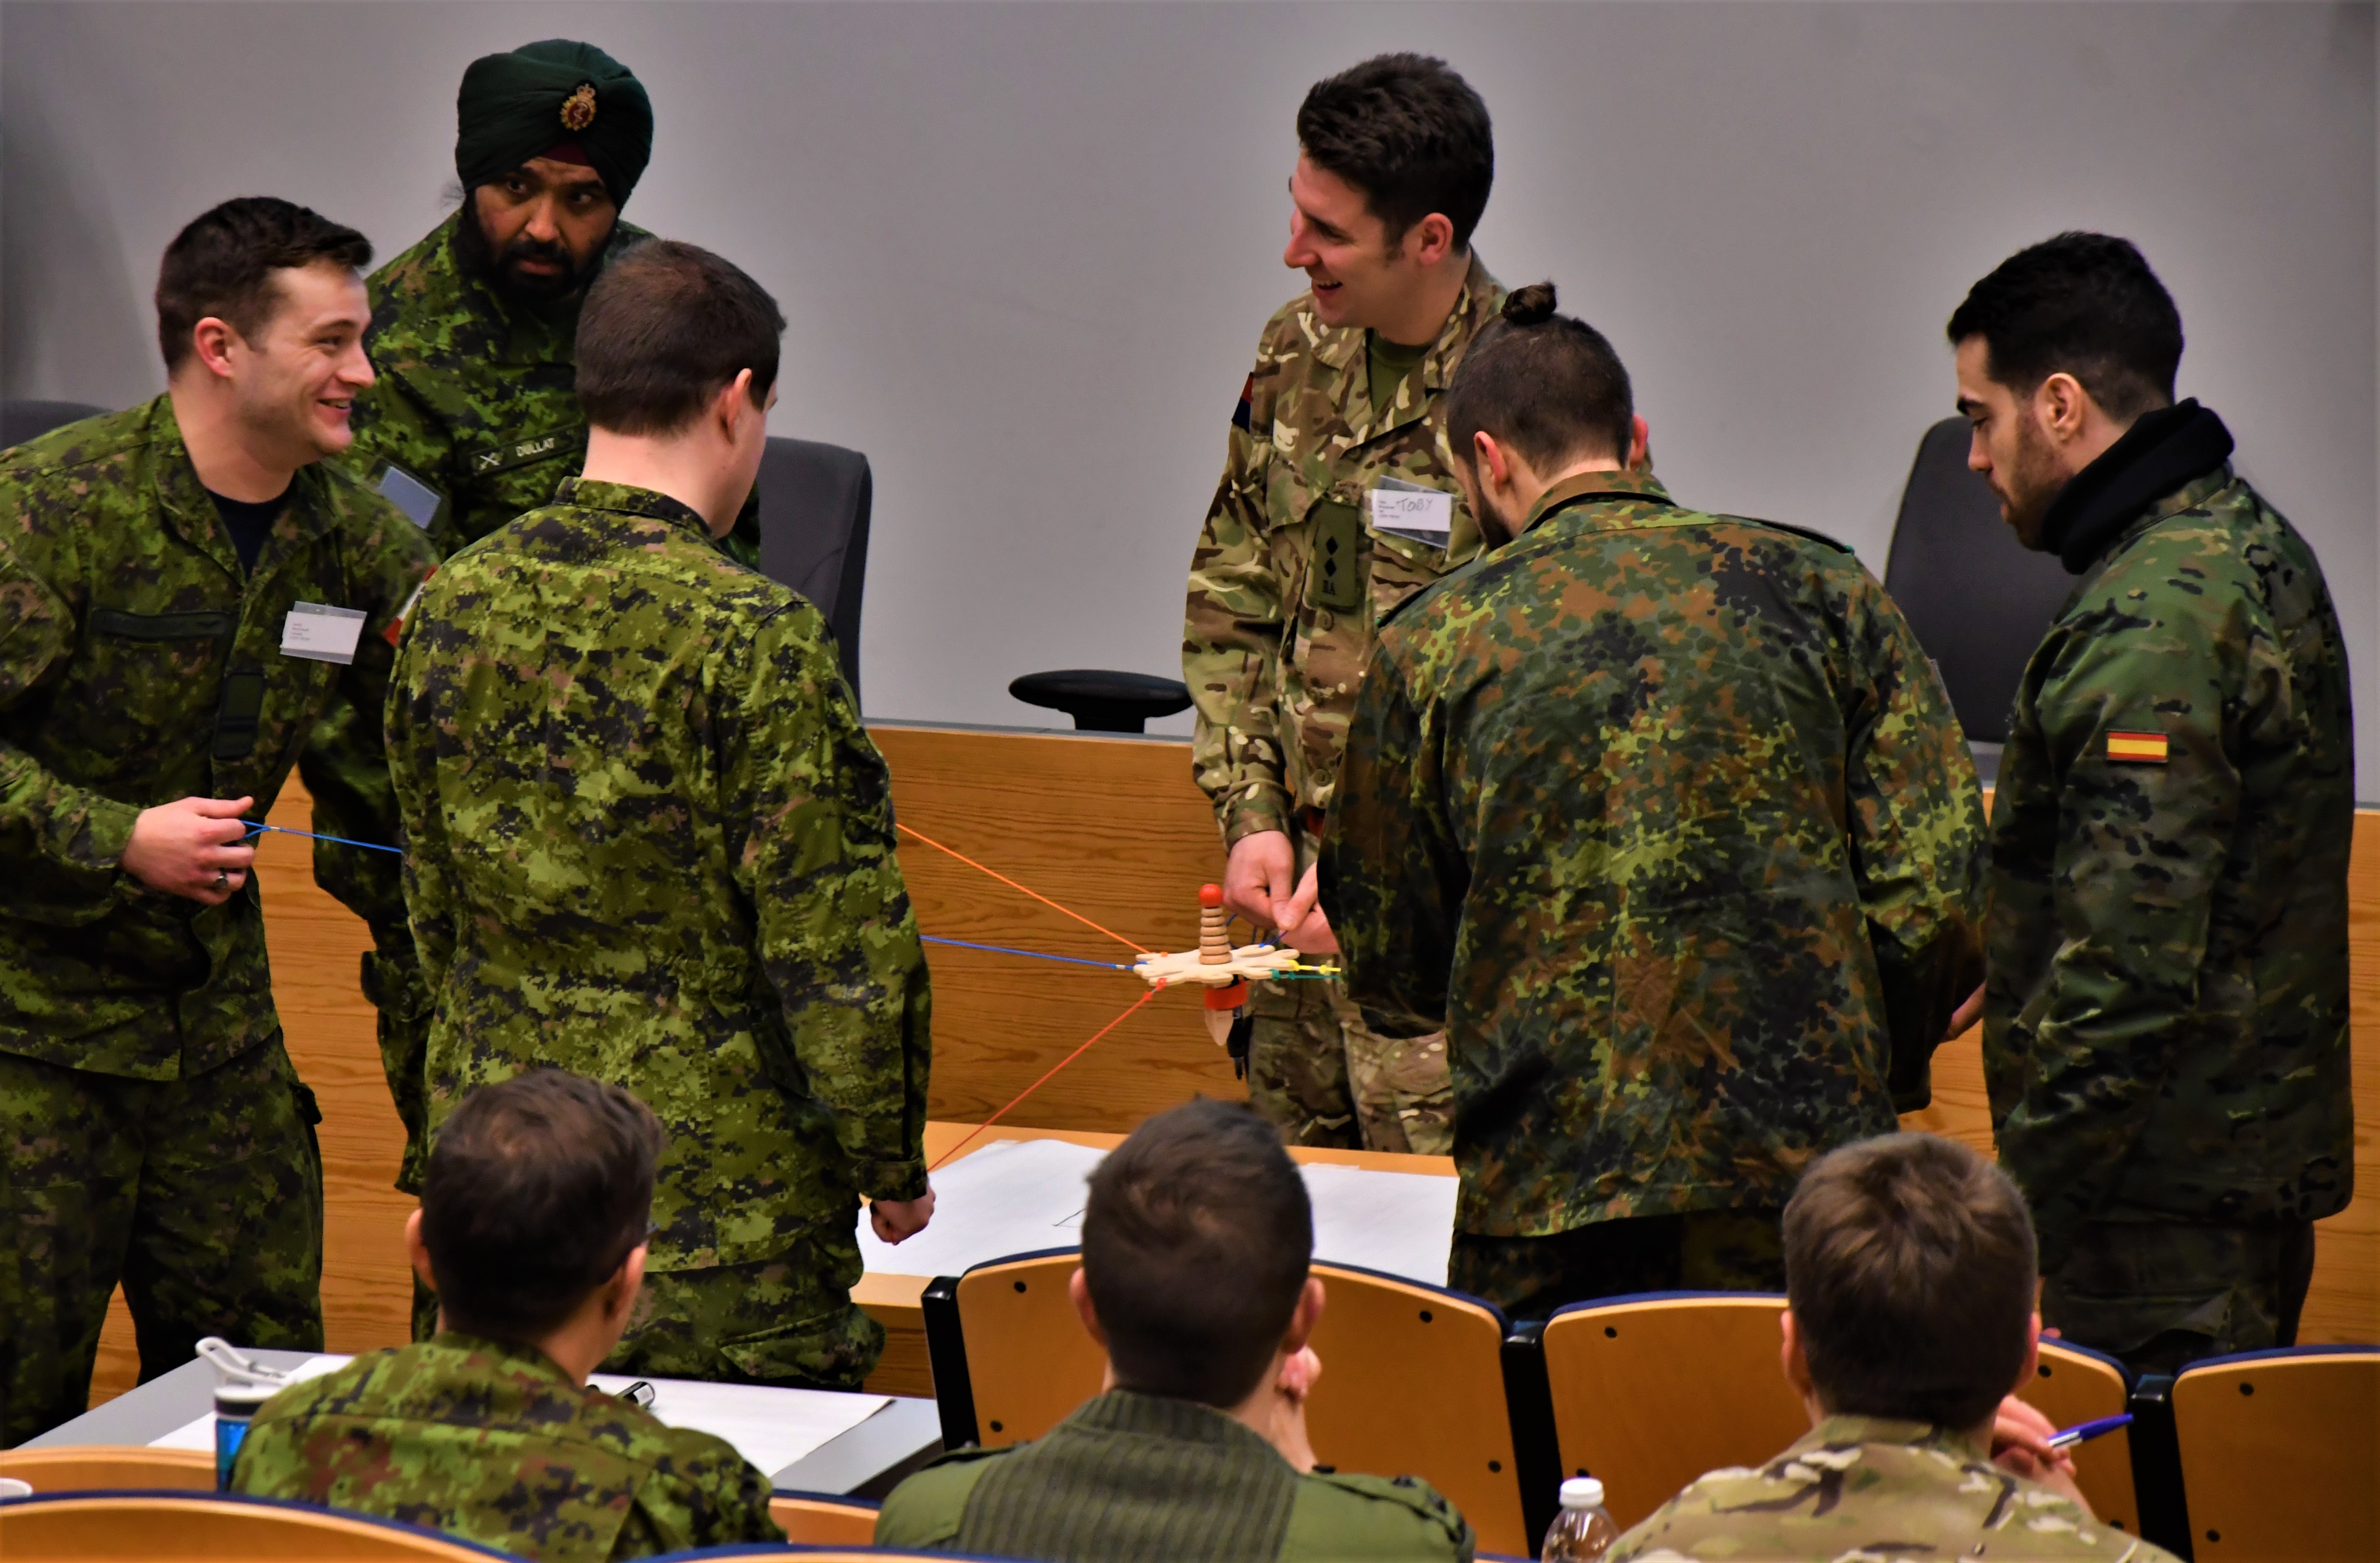 The workshop participants perform a group drawing activity together. Left to right: Lt Jared Mackintosh (Canada), Capt Charan Kamal Singh Dullat (Canada), Capt Scott McDowell (Canada), Lt Toby Broughab (United Kingdom), Lt Patrick Binding (Germany) and 2Lt Mario Bernus (Spain).